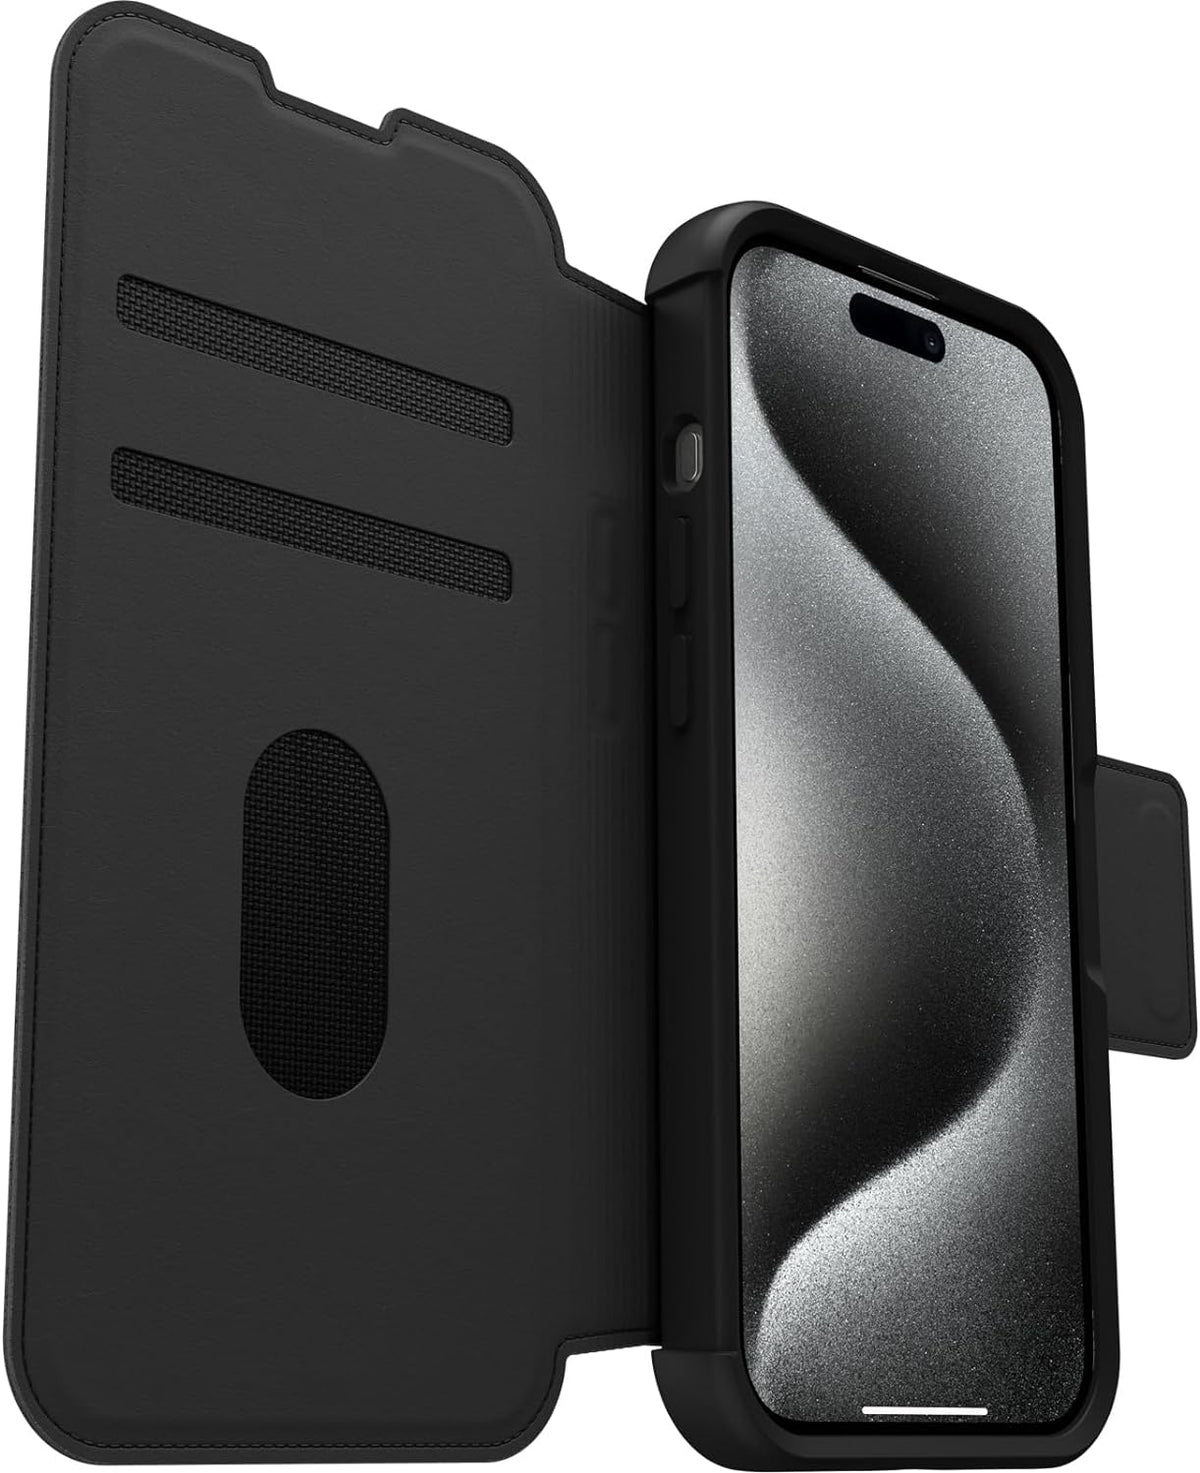 Otterbox Case For iPhone 15 Pro Strada Folio Compatible With MagSafe Case Shadow Black